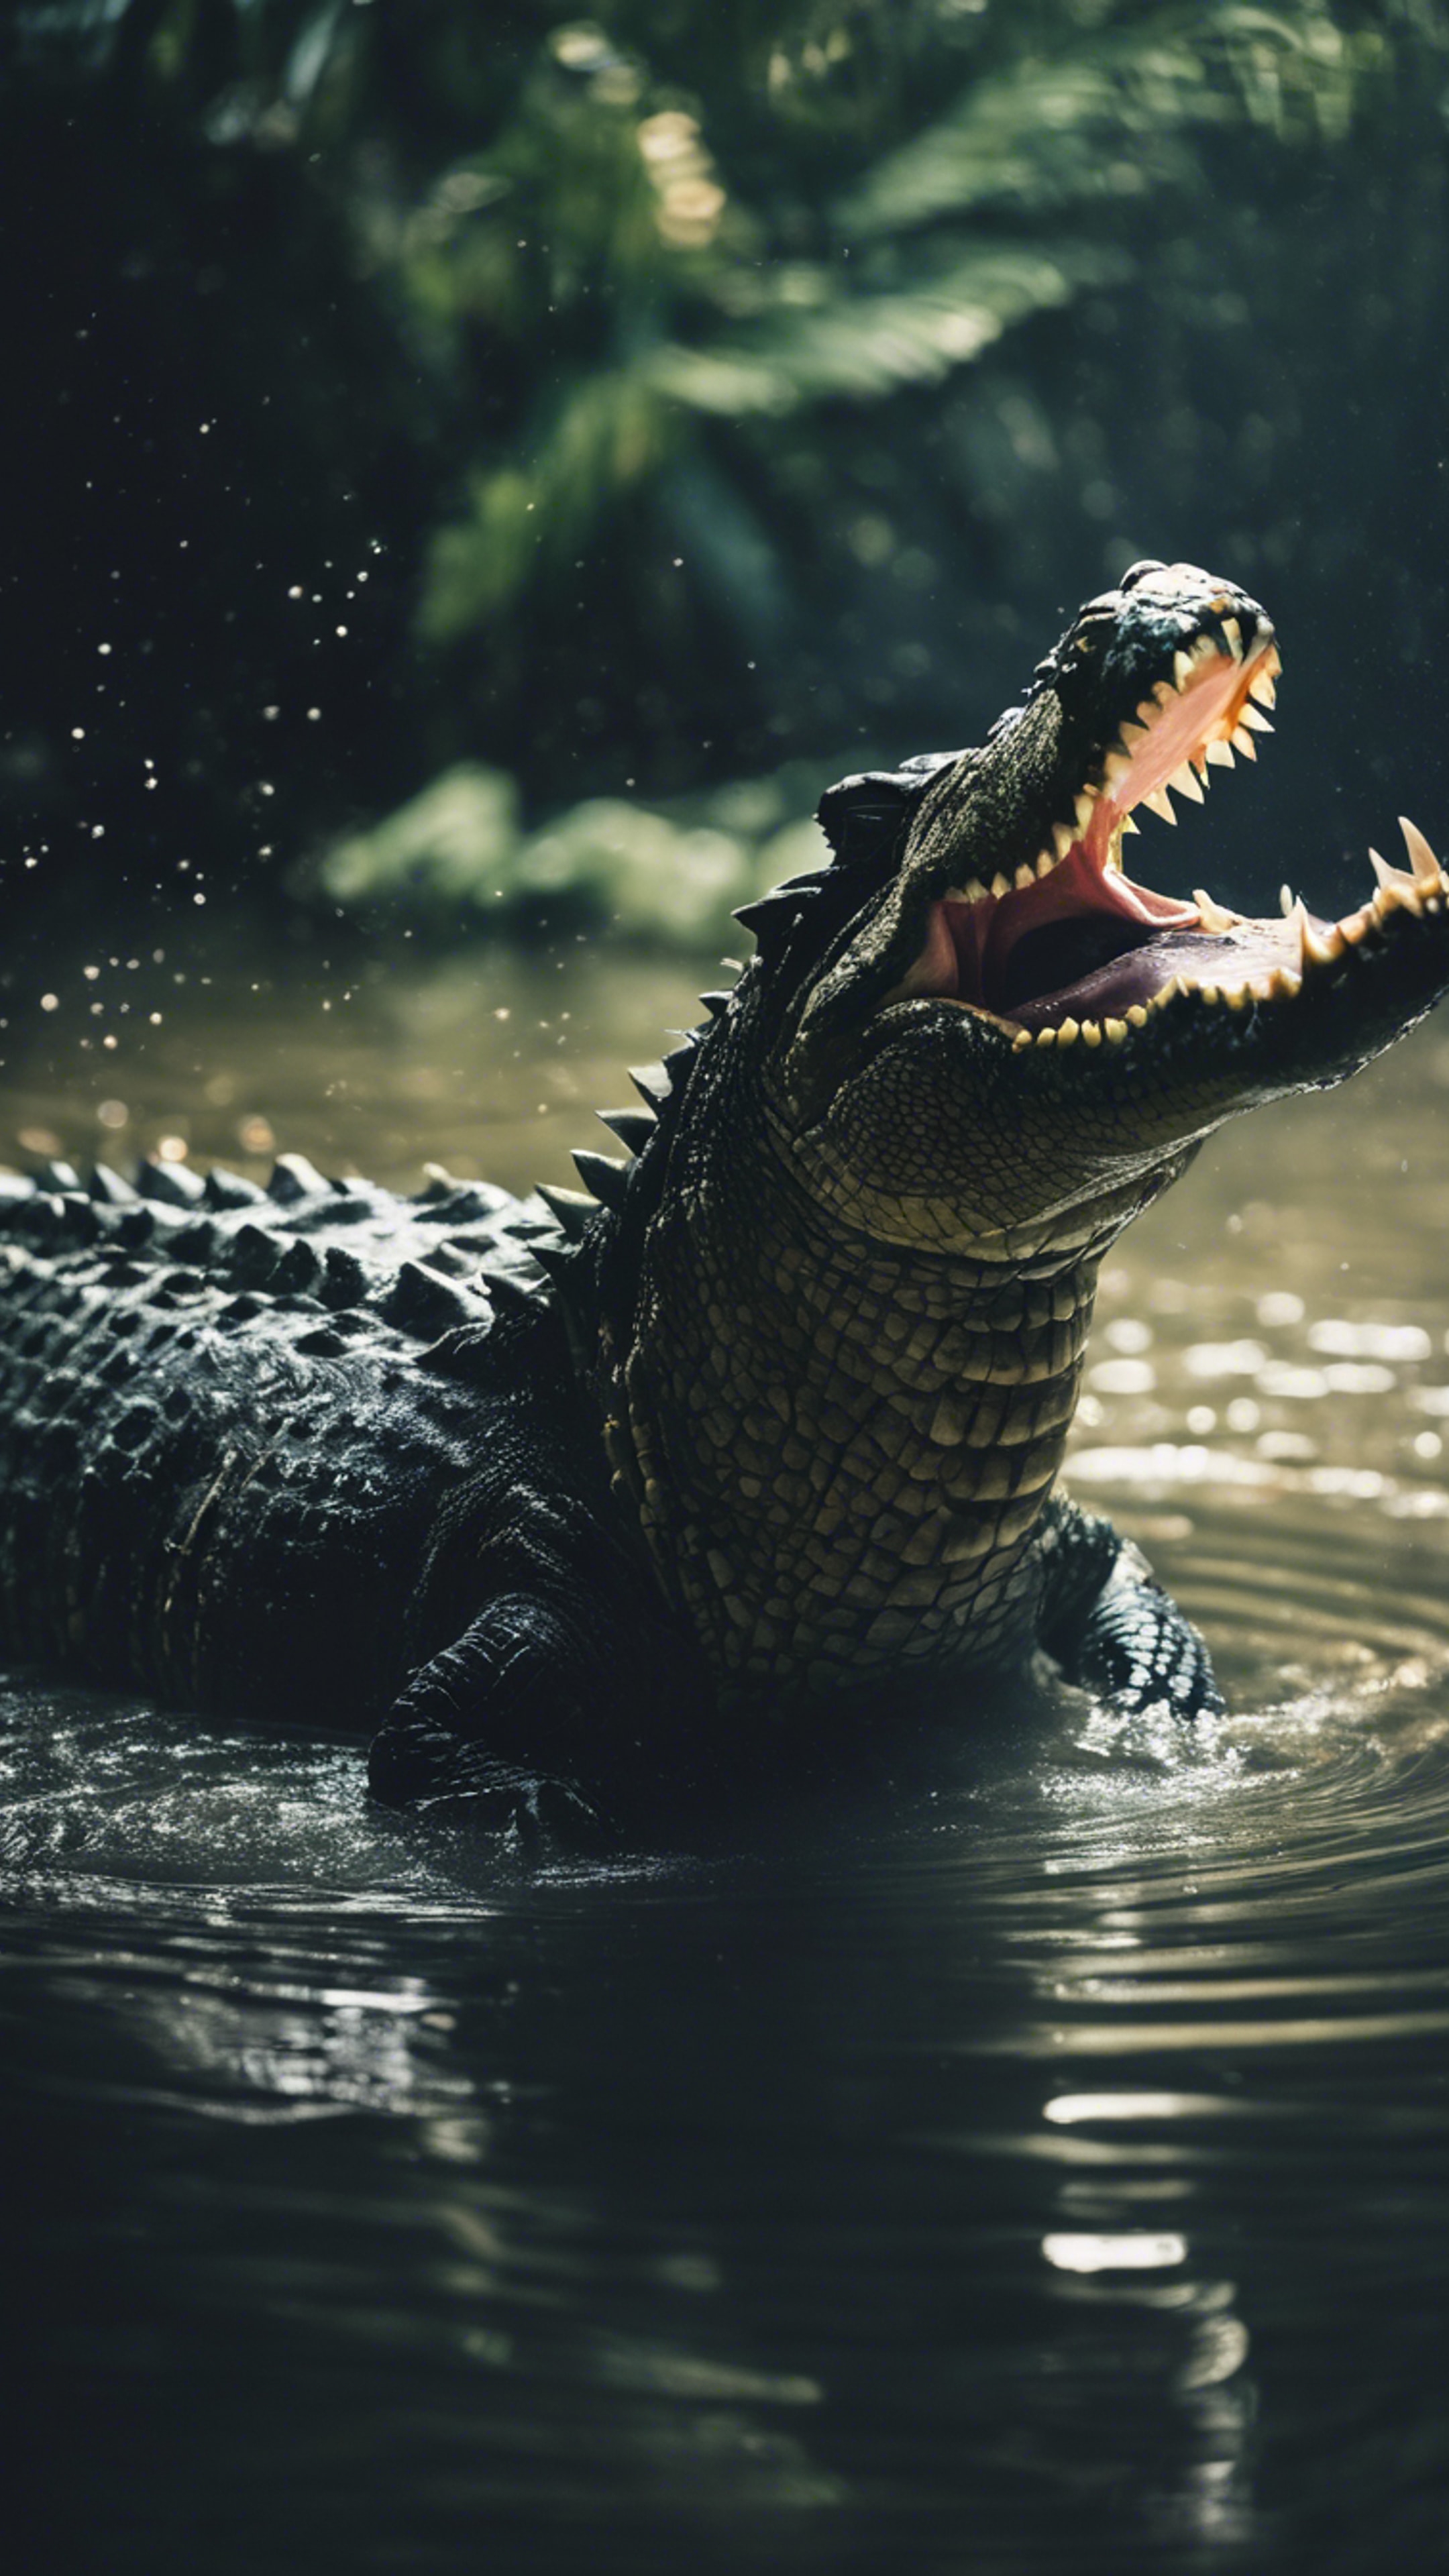 Two crocodiles engaging in a territorial battle in the middle of a dark lagoon. Taustakuva[ccc66b55c2b3408d8928]